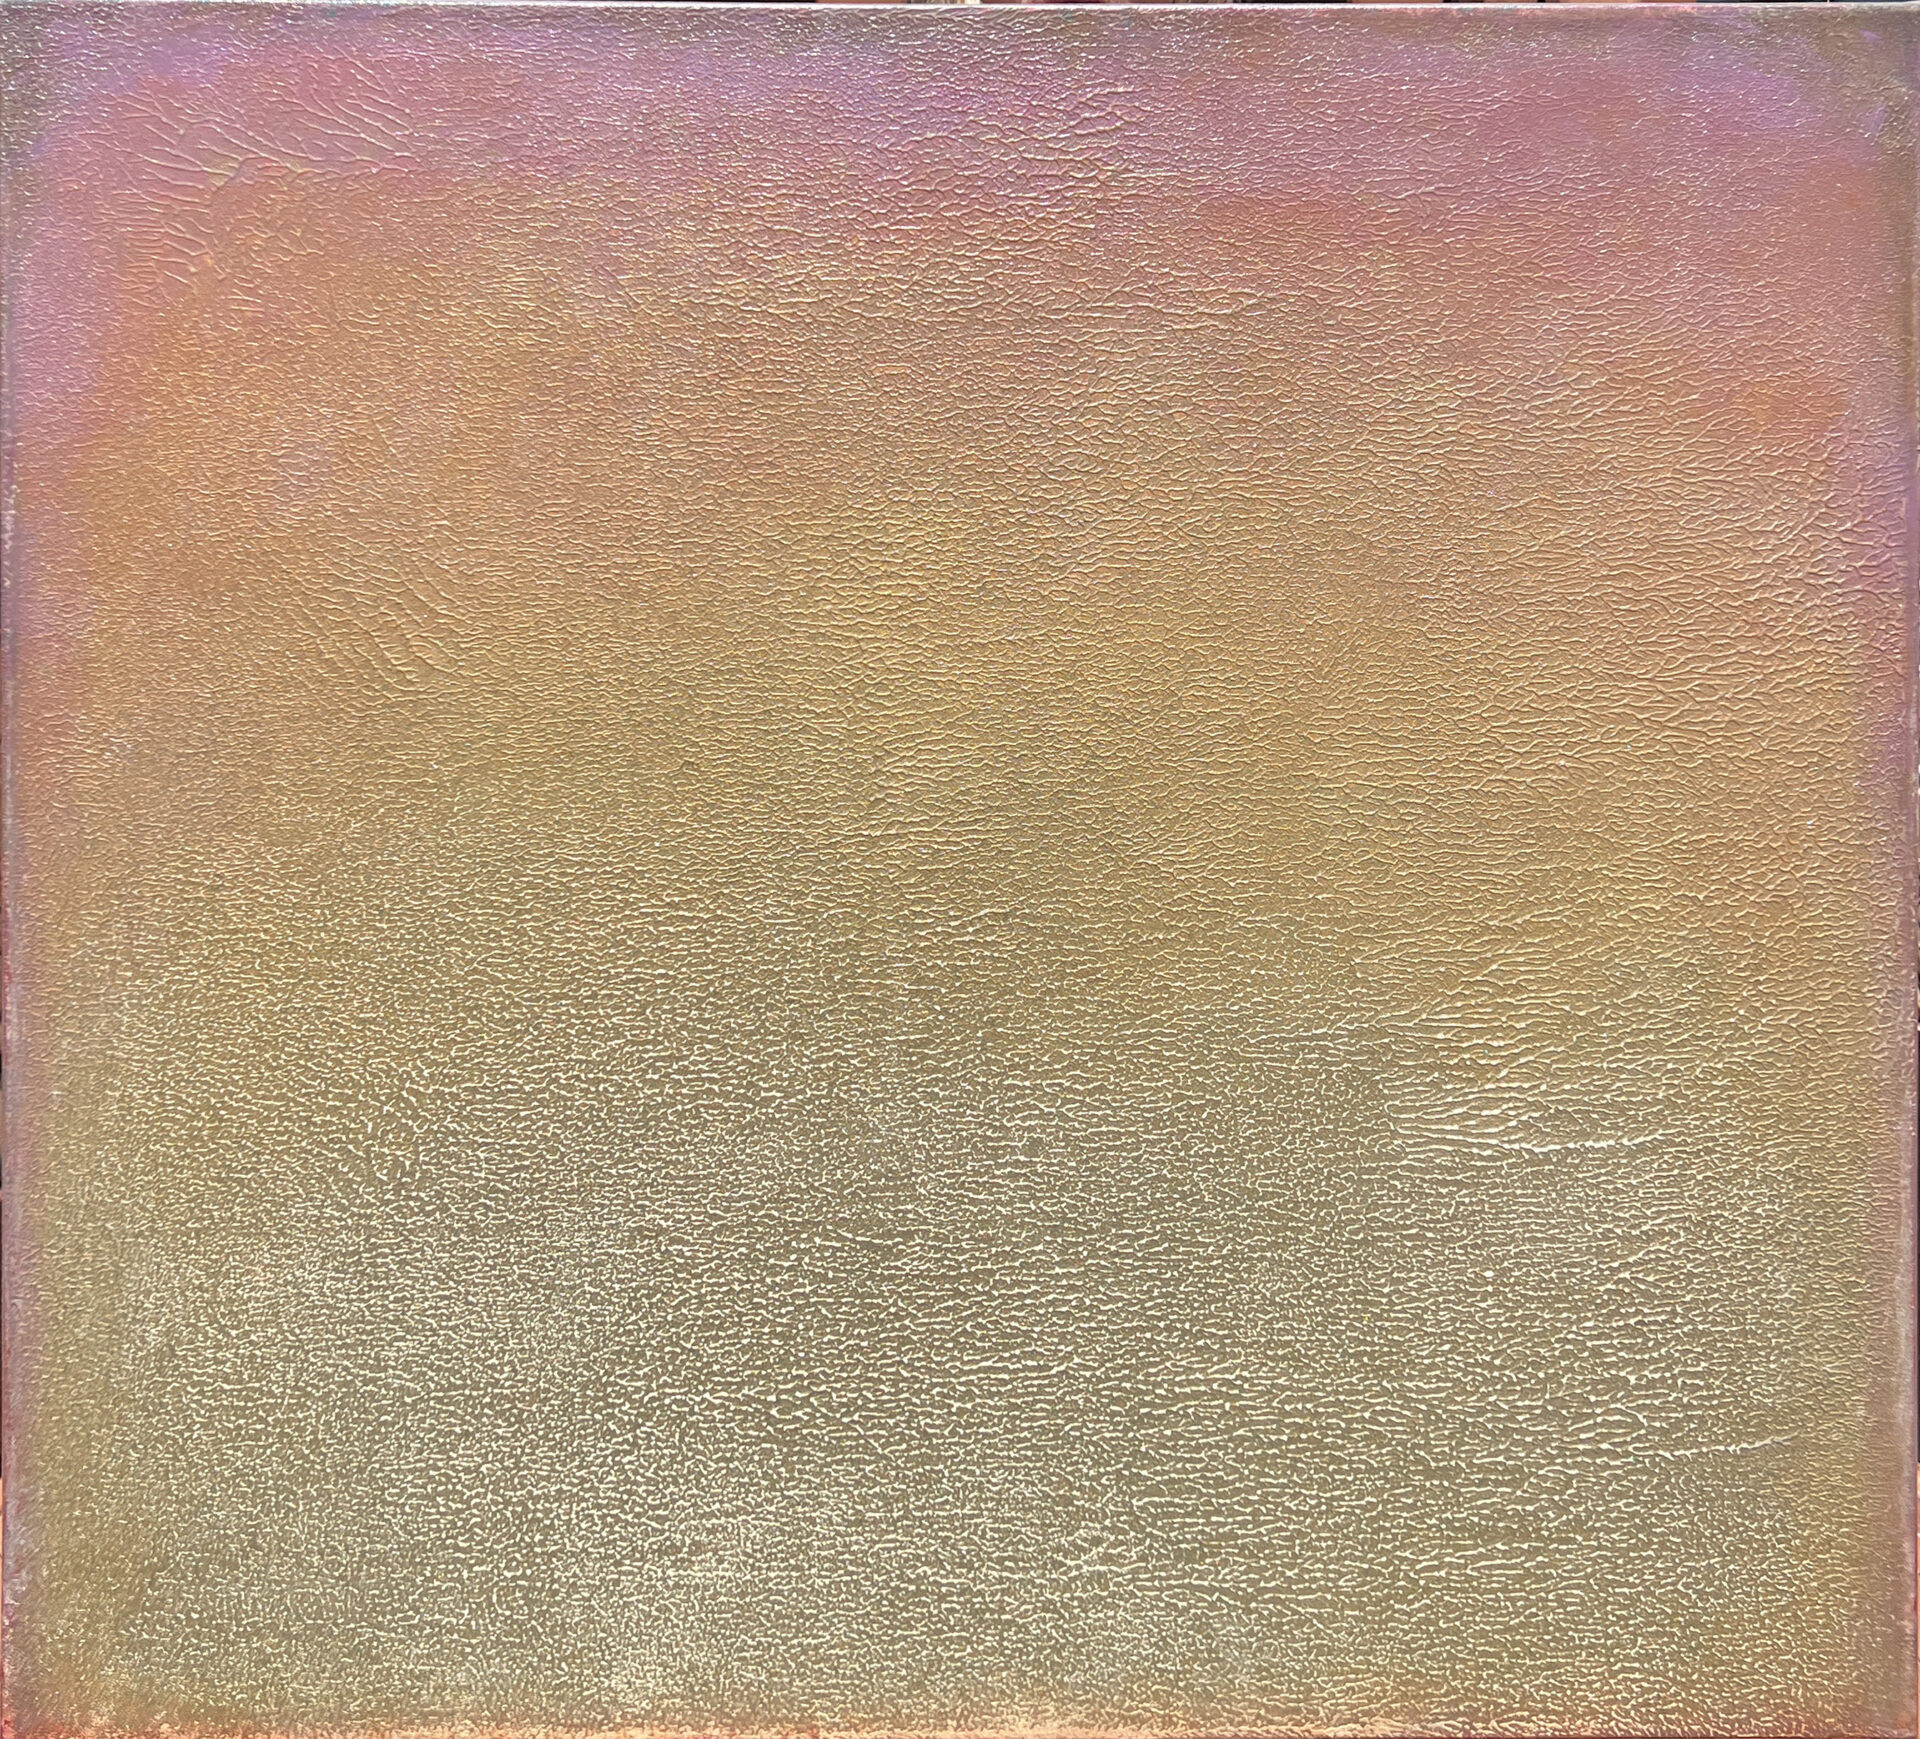 rose/gold abstract painting